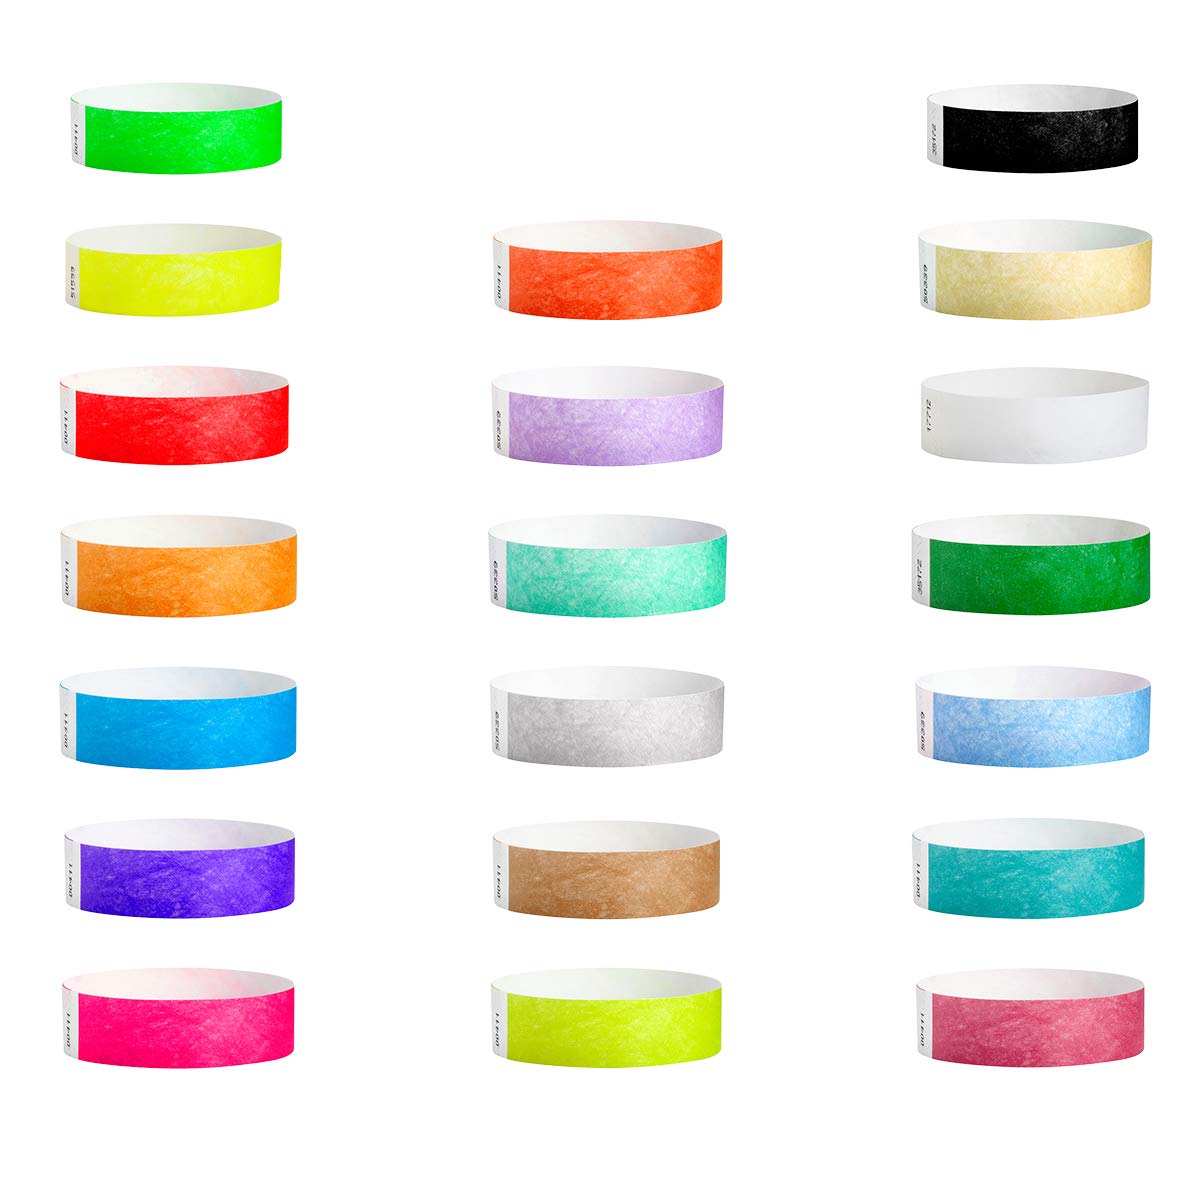 WristCo 20 Color Variety Pack Tyvek Wristbands for Events - 200 Count - Comfortable Tear Resistant Paper Bracelets ID Wrist Bands for Concerts Festivals Admission Party Identification